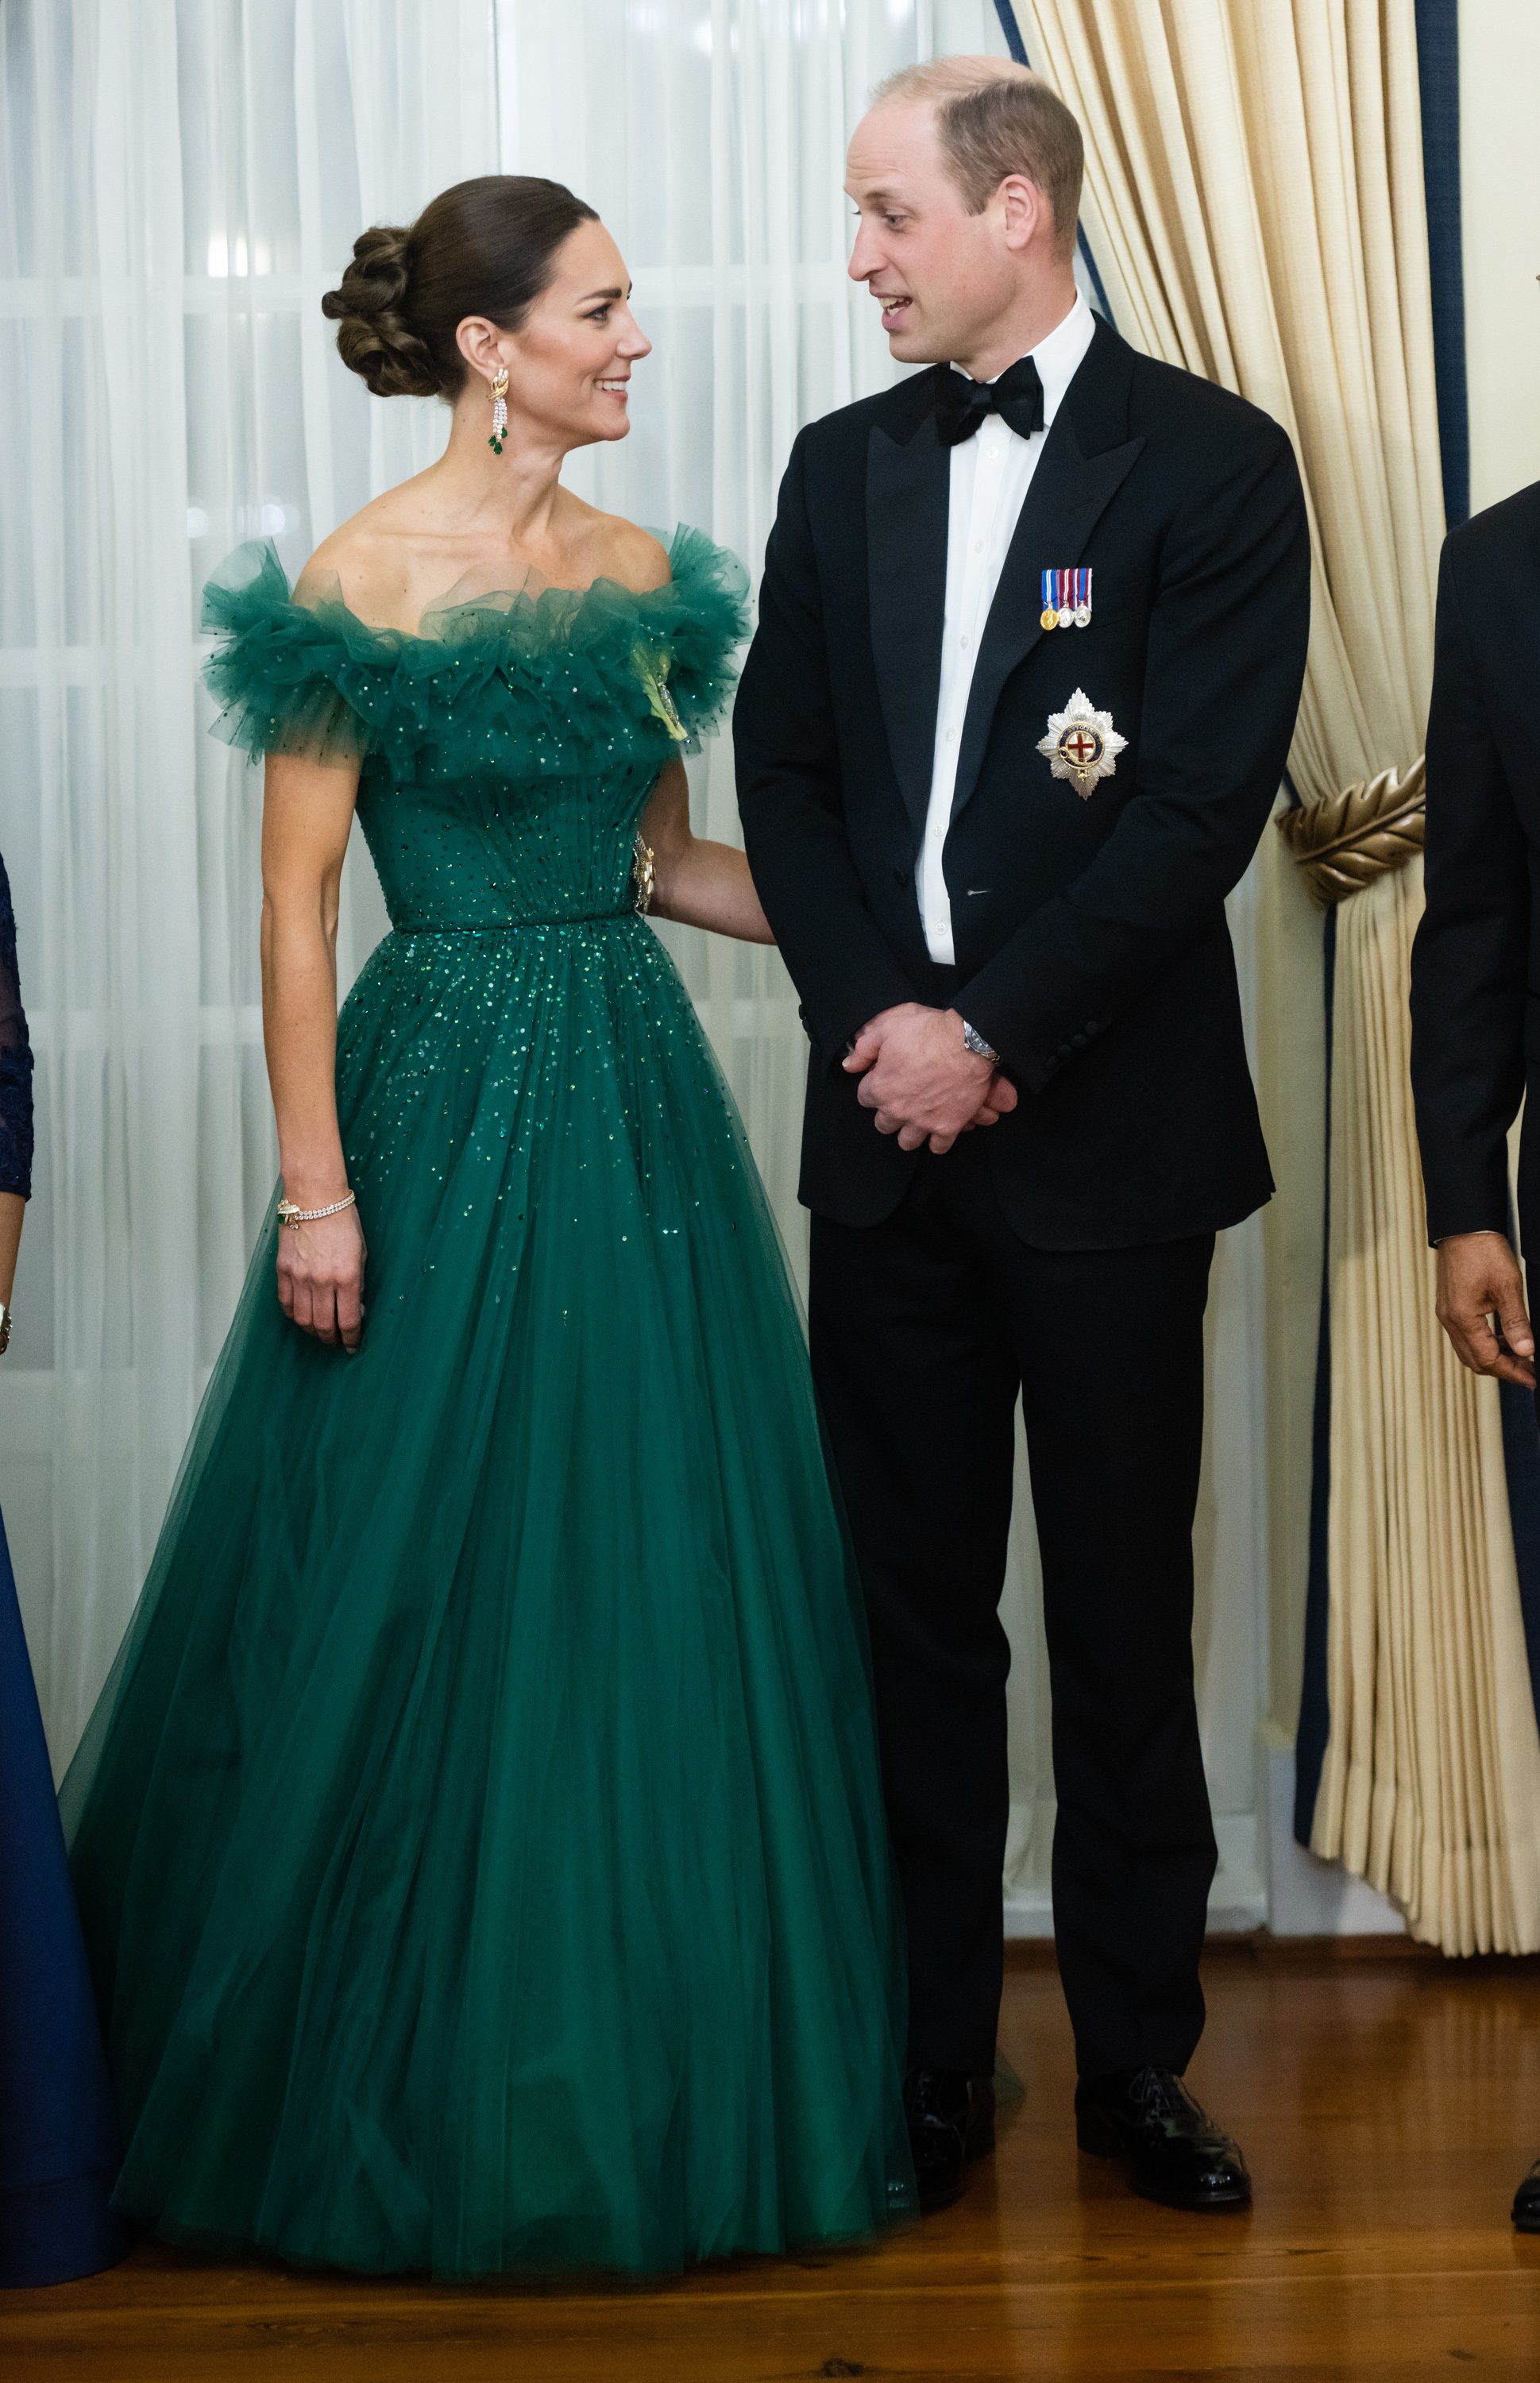 Catherine, Duchess of Cambridge and Prince William, Duke of Cambridge attend a dinner hosted by the Governor General of Jamaica at King's House on March 23, 2022 in Kingston, Jamaica.  |  Source: Getty Images